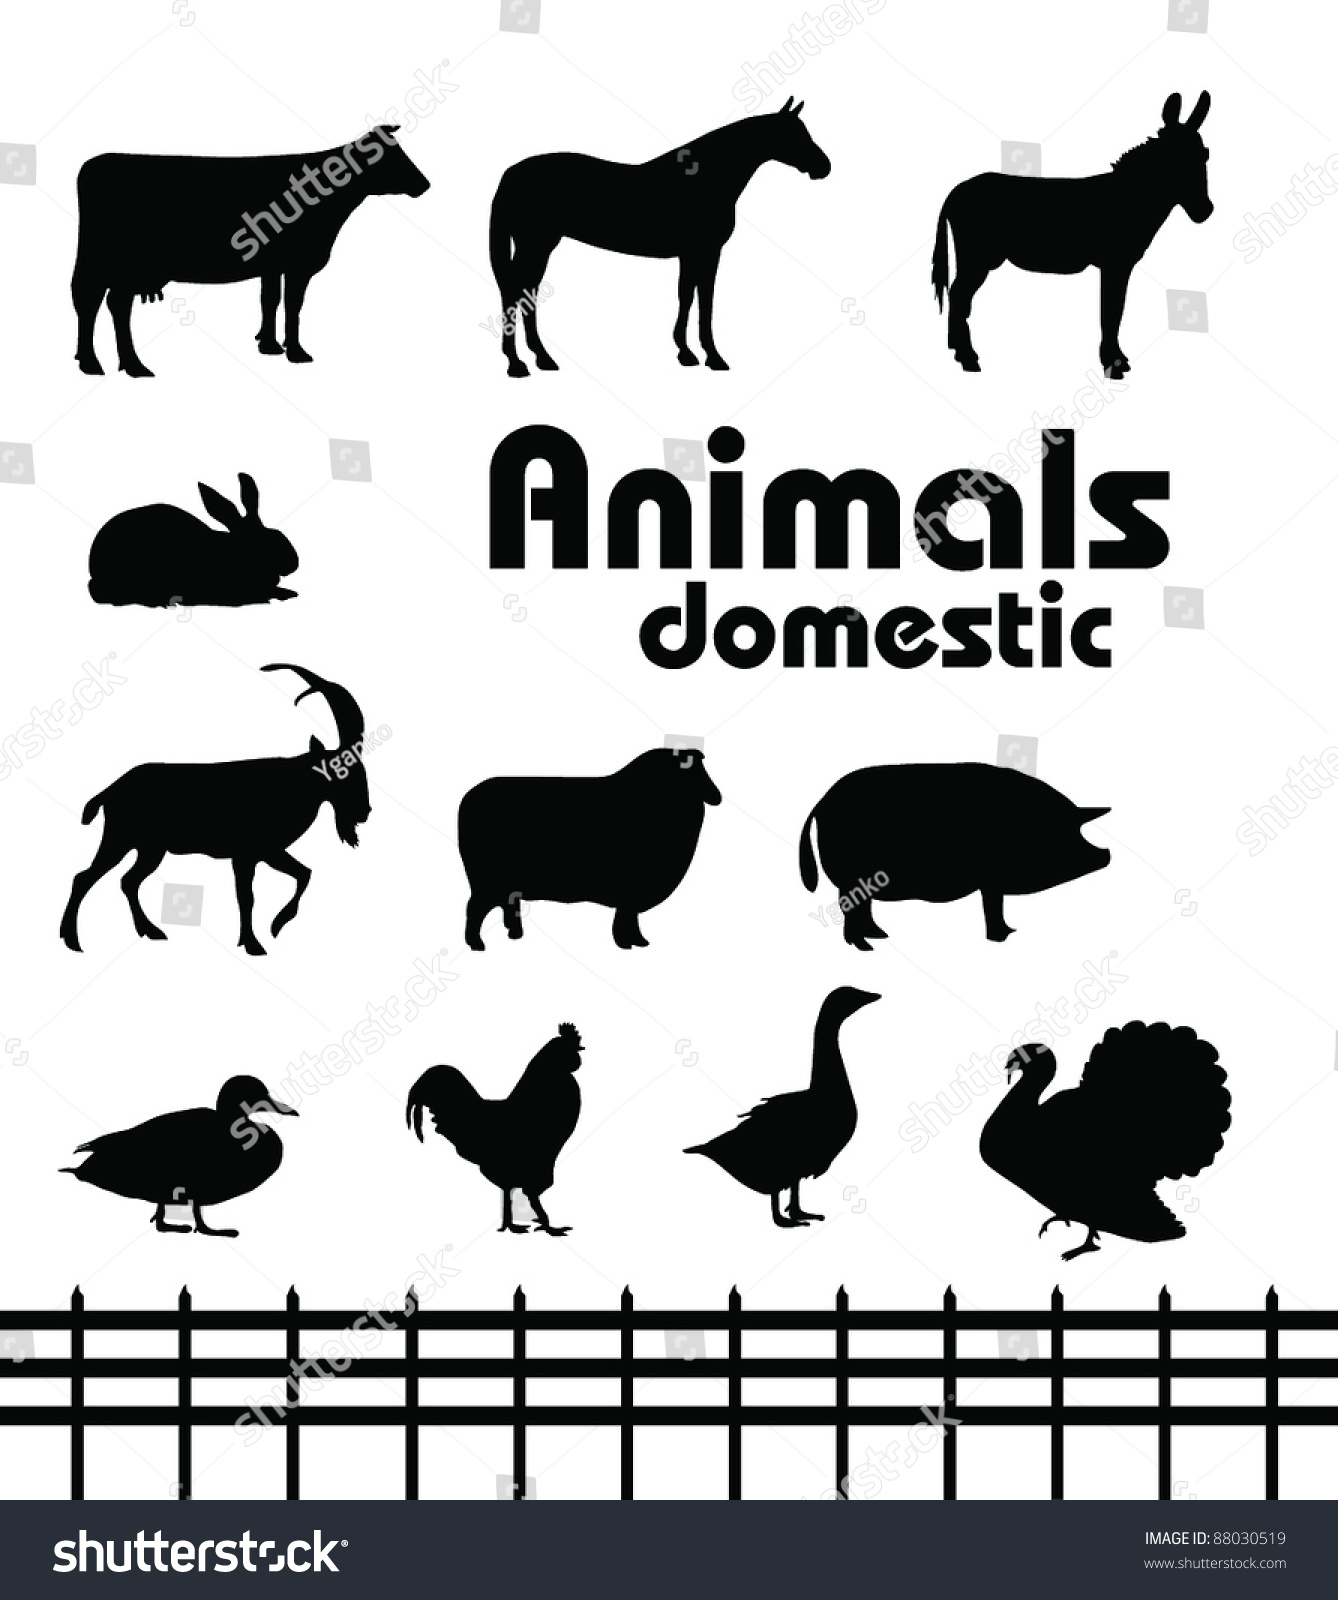 clipart images of domestic animals - photo #31